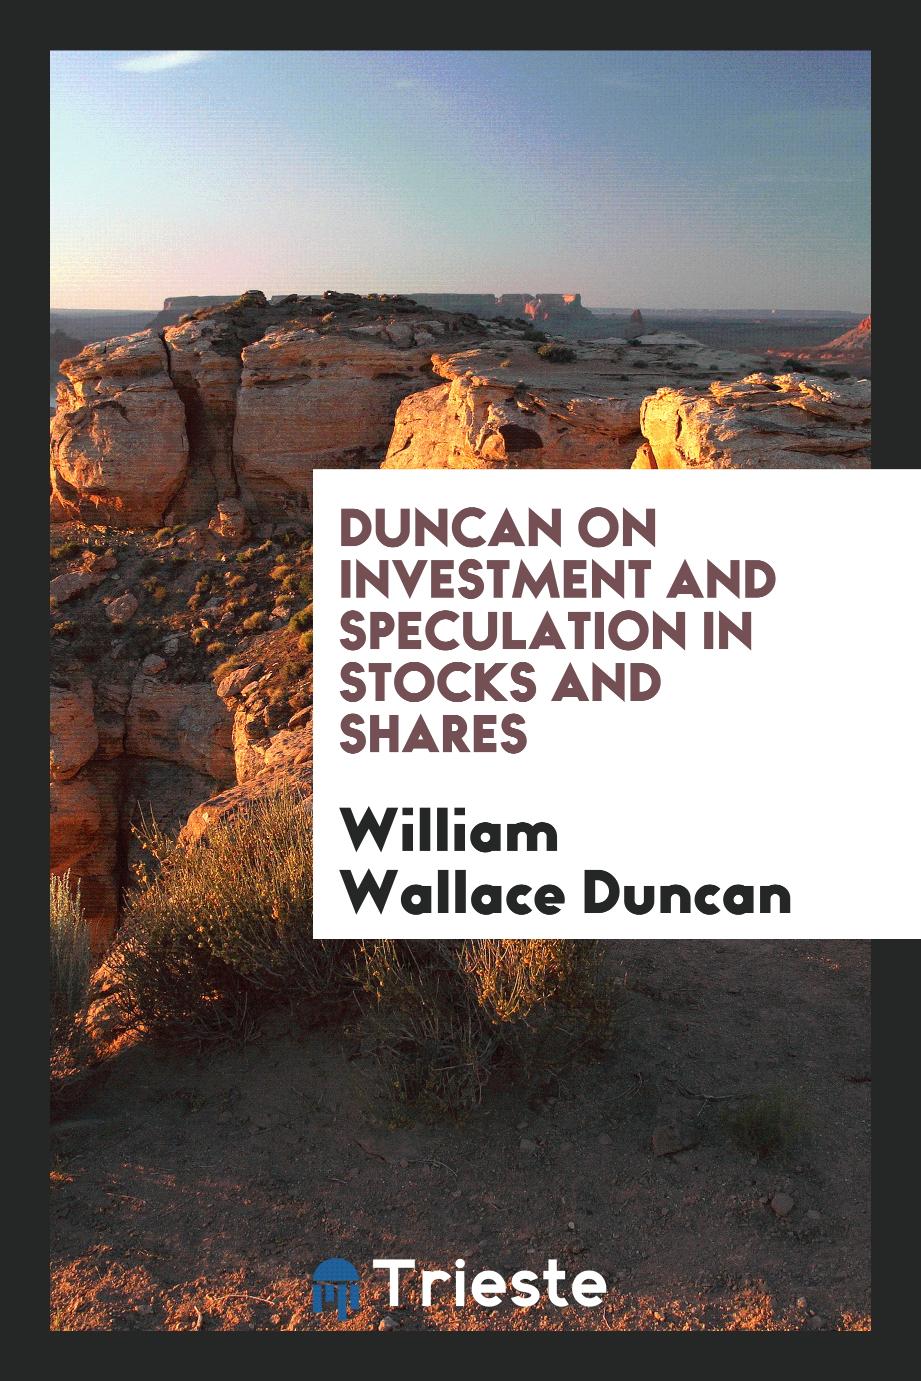 William Wallace Duncan - Duncan on Investment and Speculation in Stocks and Shares